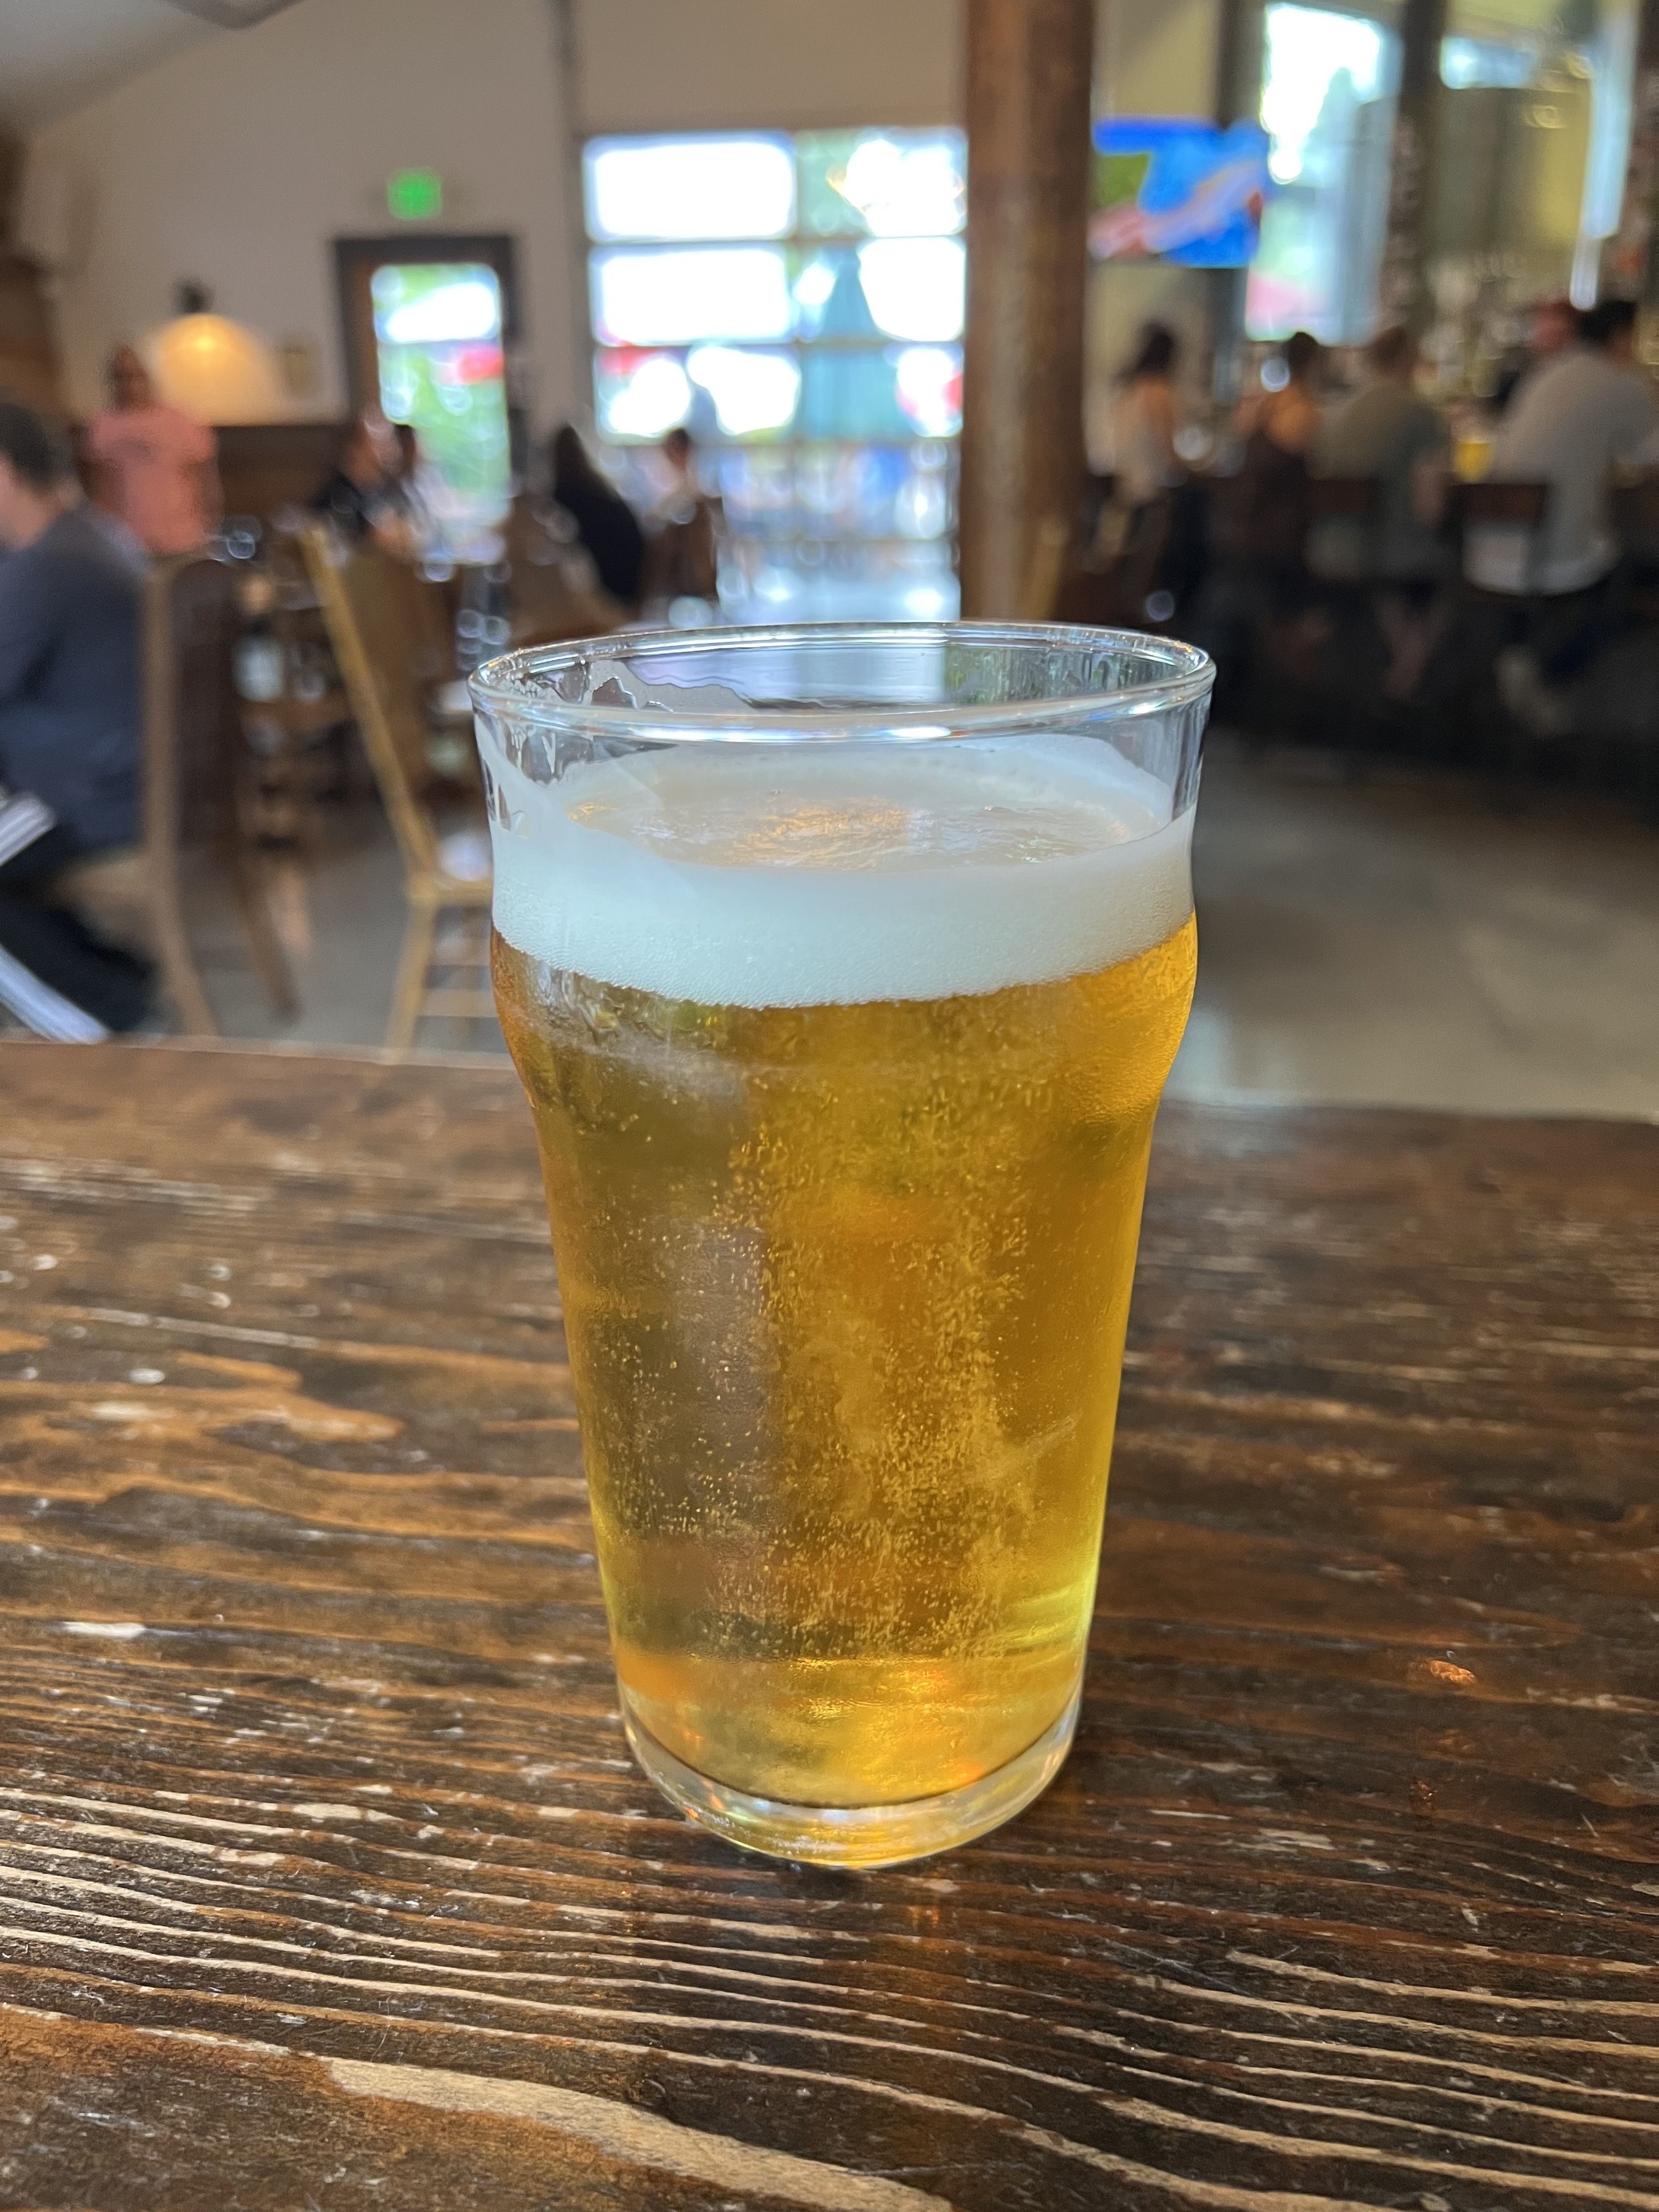 A photo of a pint glass full of beer.